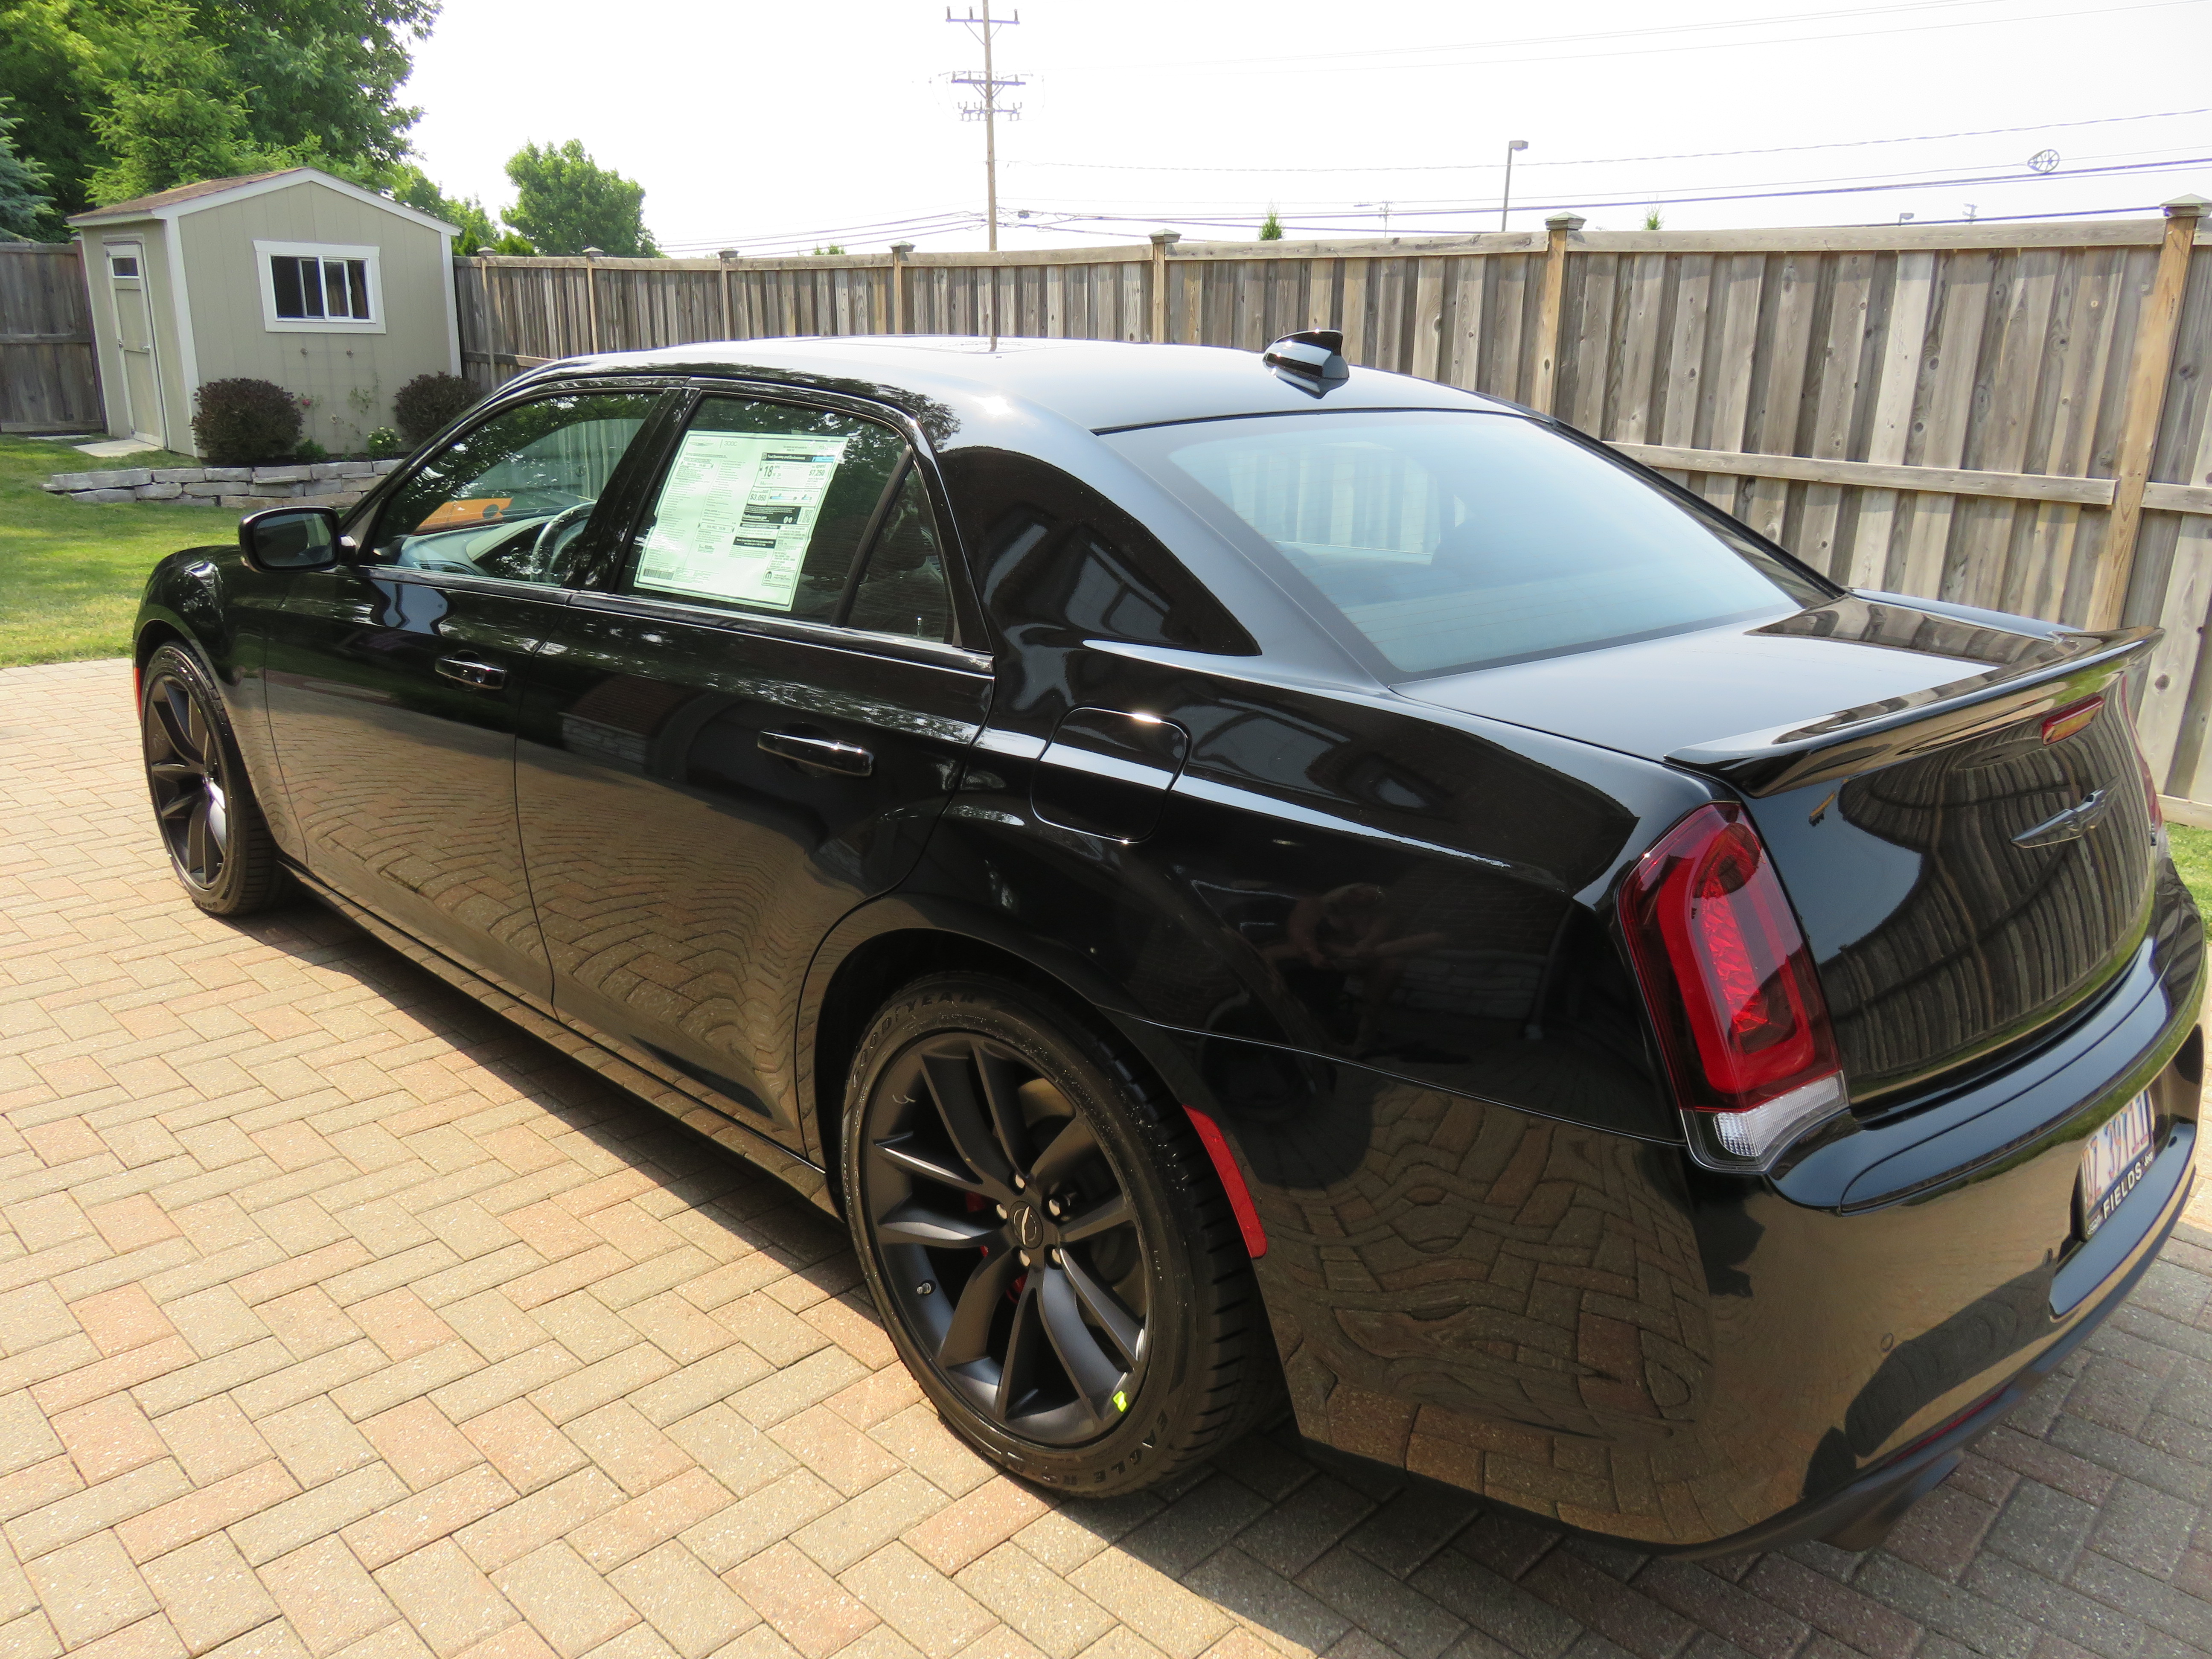 Used Chrysler 300 for Sale Right Now - Autotrader